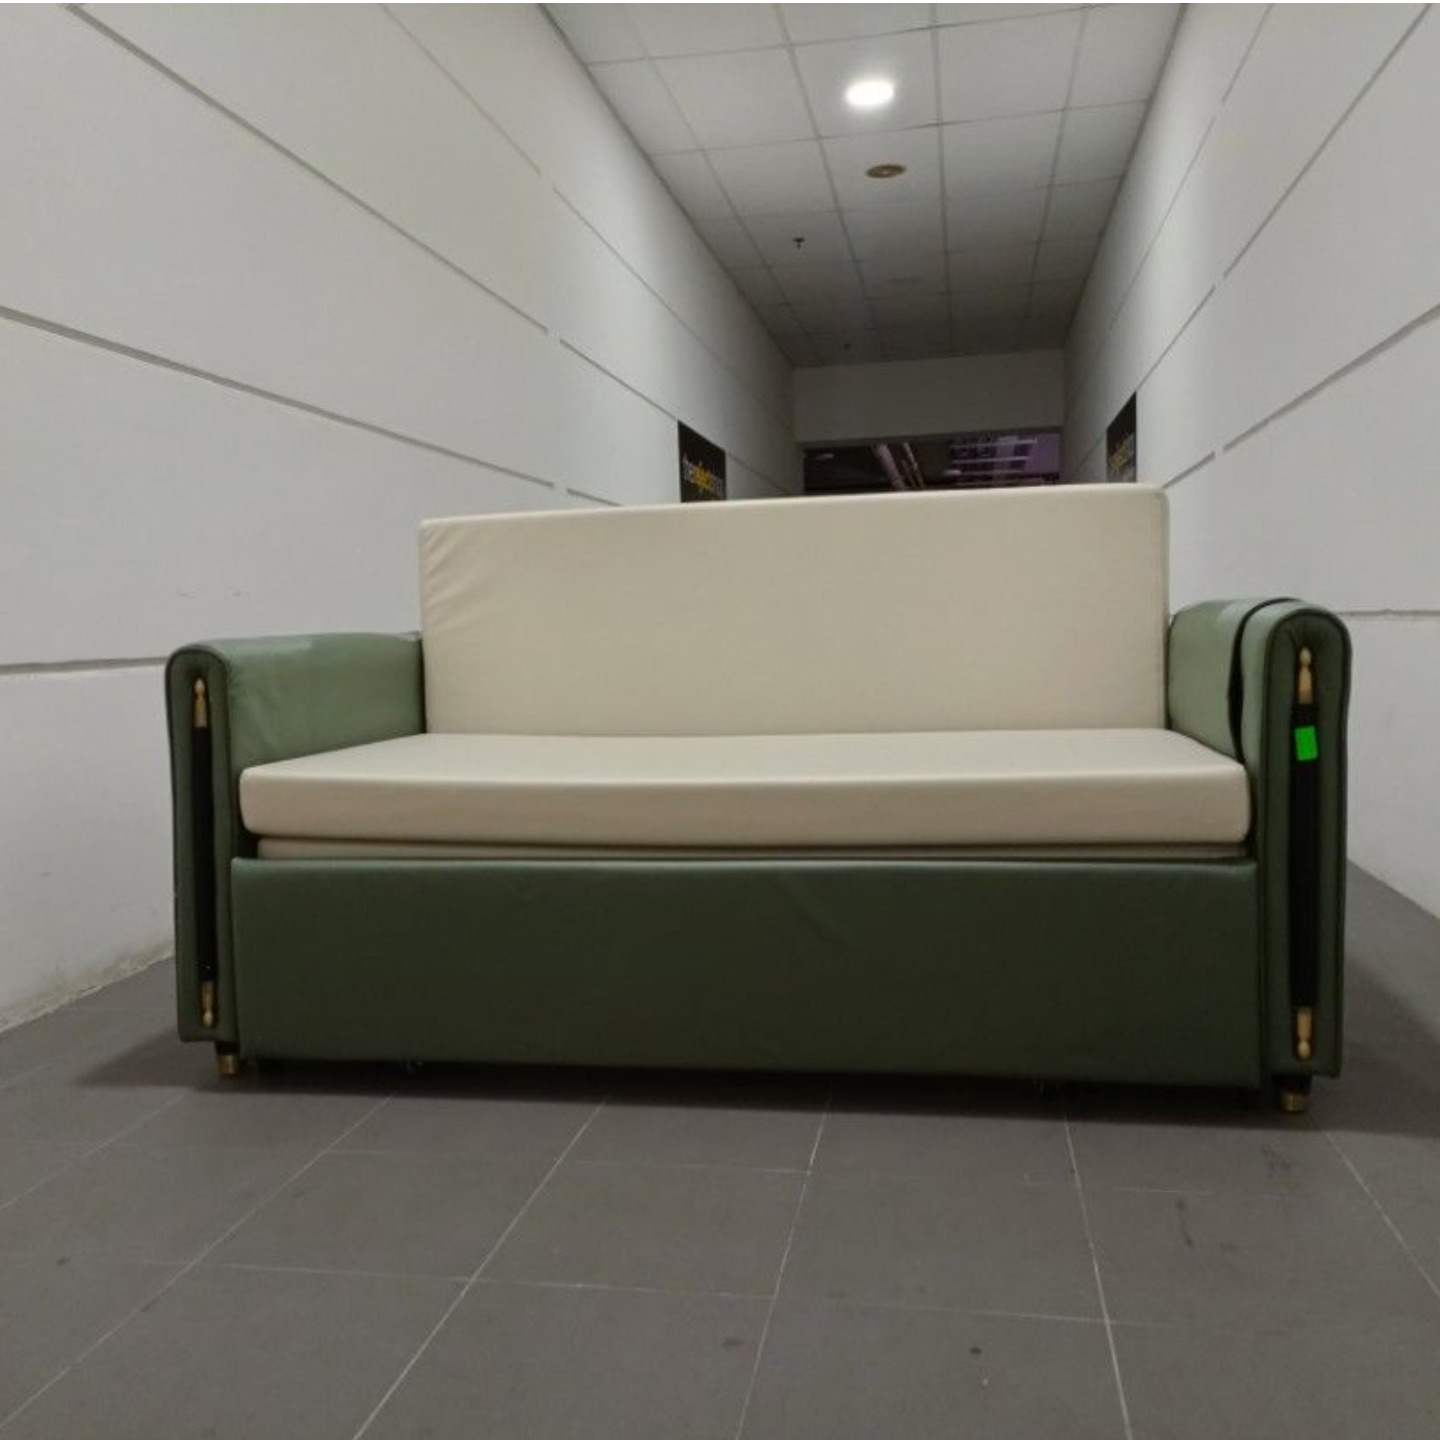 EKIES 1.6M Sofa Bed in CHAMPION GREEN and CREAM Leathaire Upholstery